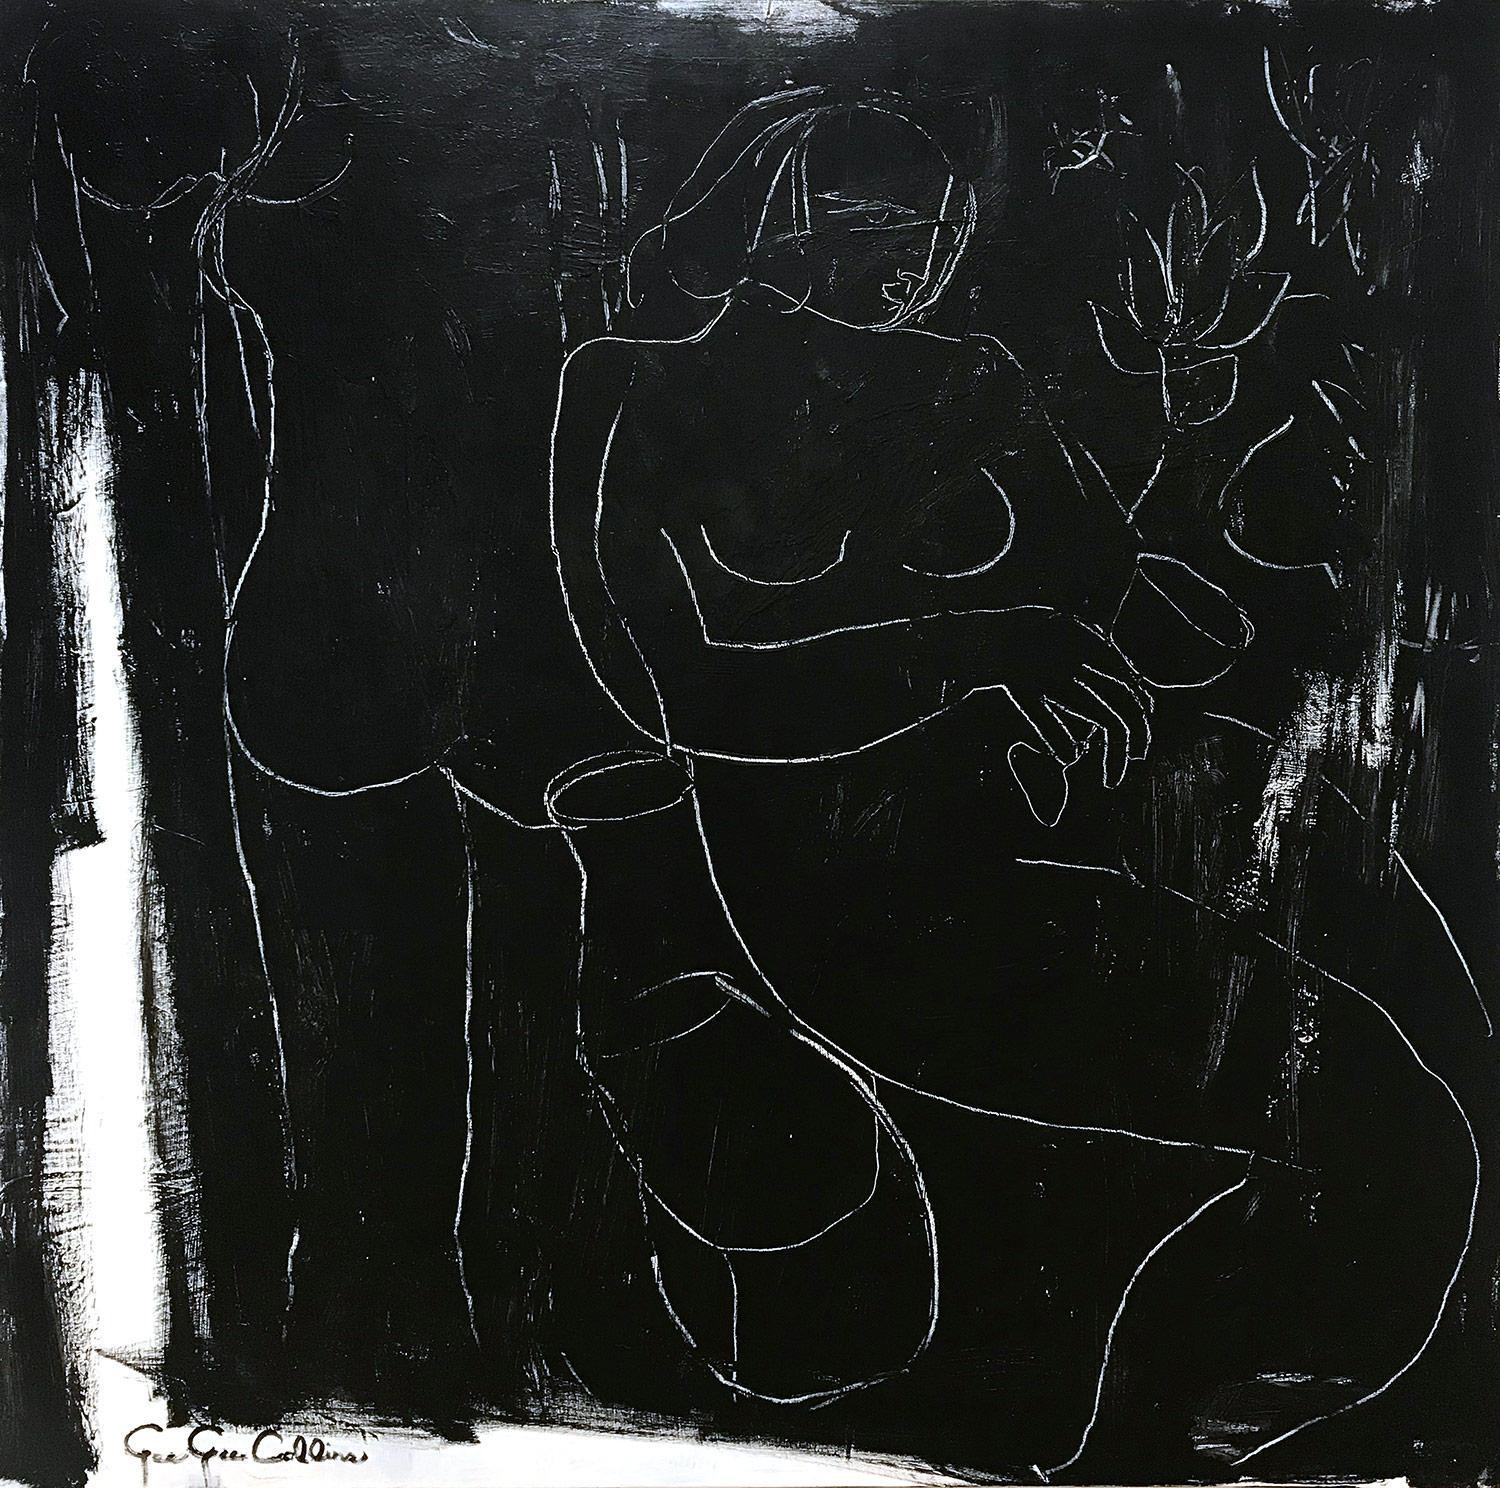 Gee Gee Collins Abstract Painting - "Sorento and Wine" Modernist Black and White Abstract Nudes Painting on Canvas